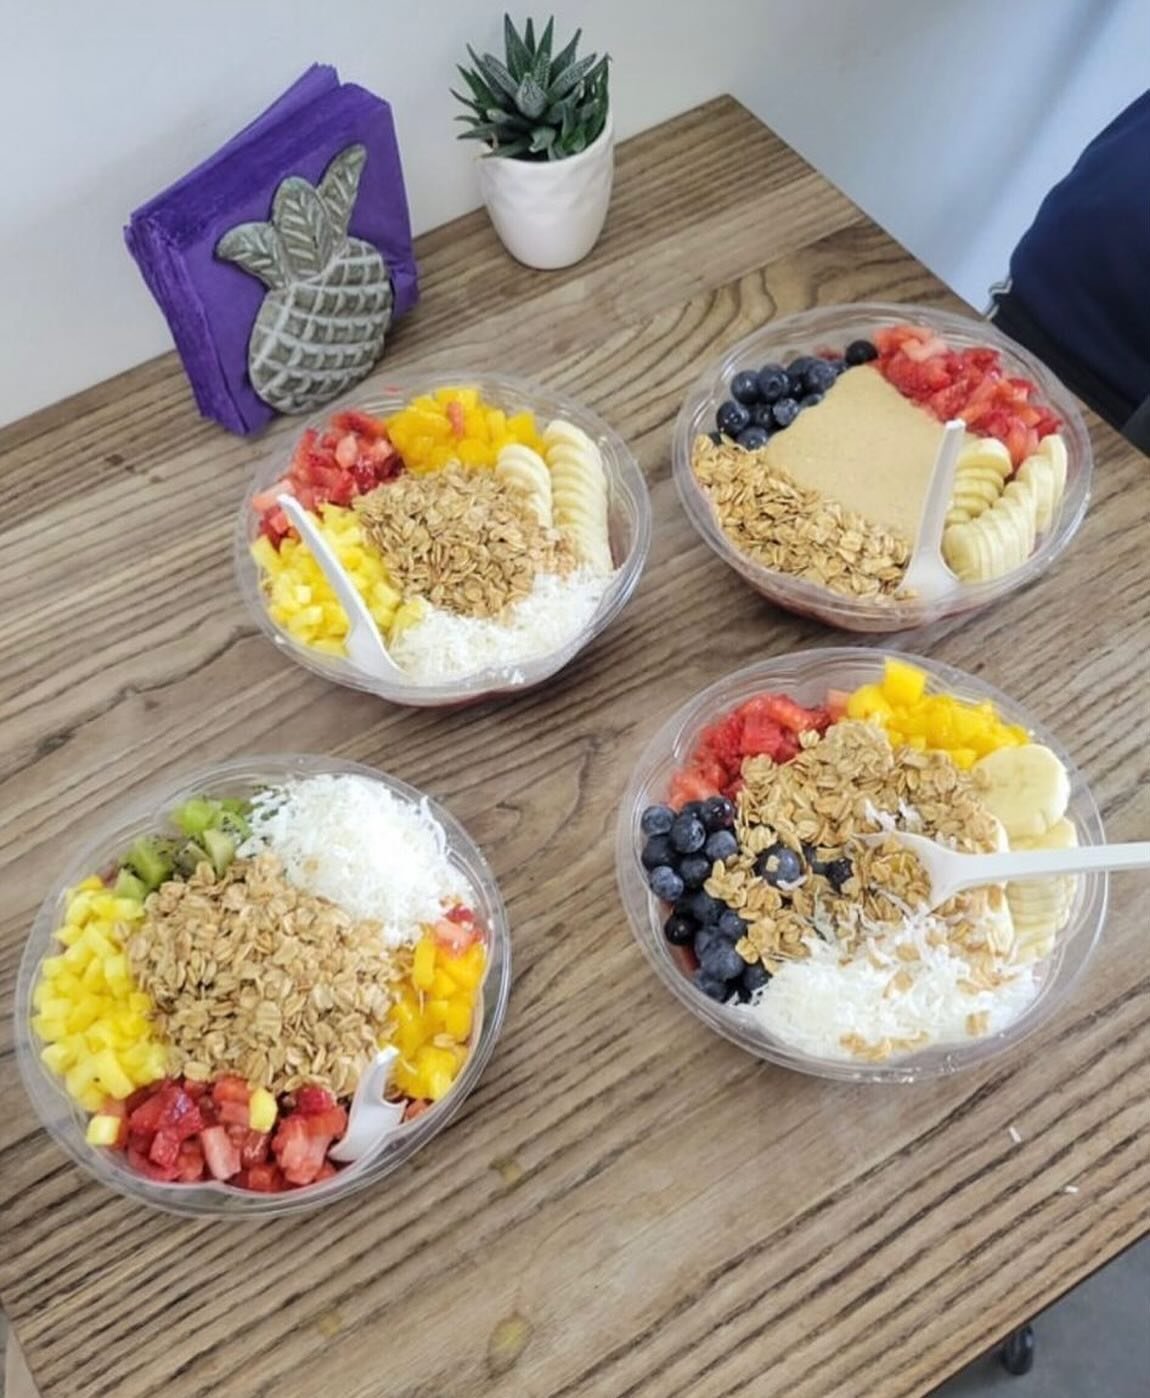 The Juice Mafia a&ccedil;a&iacute; bowl might just be the most perfect meal for anytime of day. With your choice of toppings there are endless opportunities to take our delicious, slightly tangy and not overly sweet a&ccedil;a&iacute; base and add ex